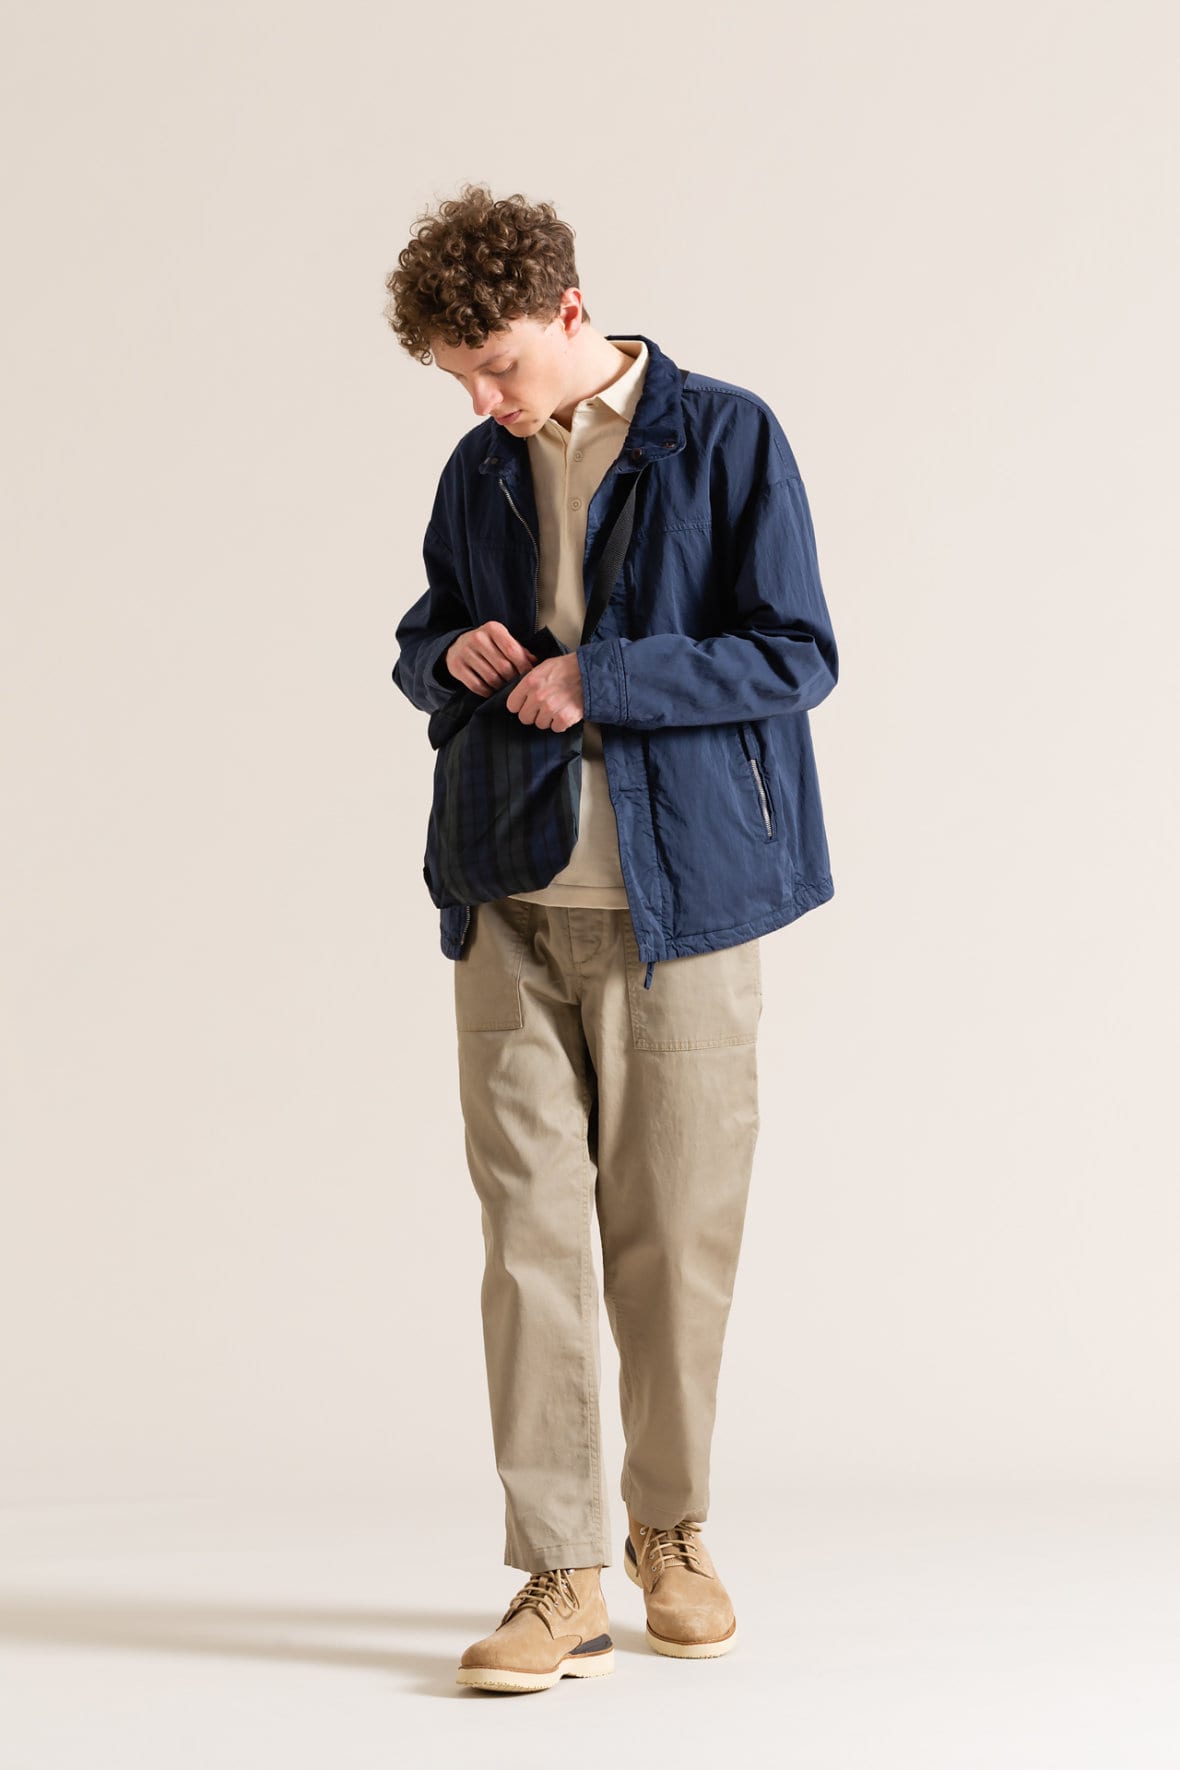 lookbook norse store ss20 4